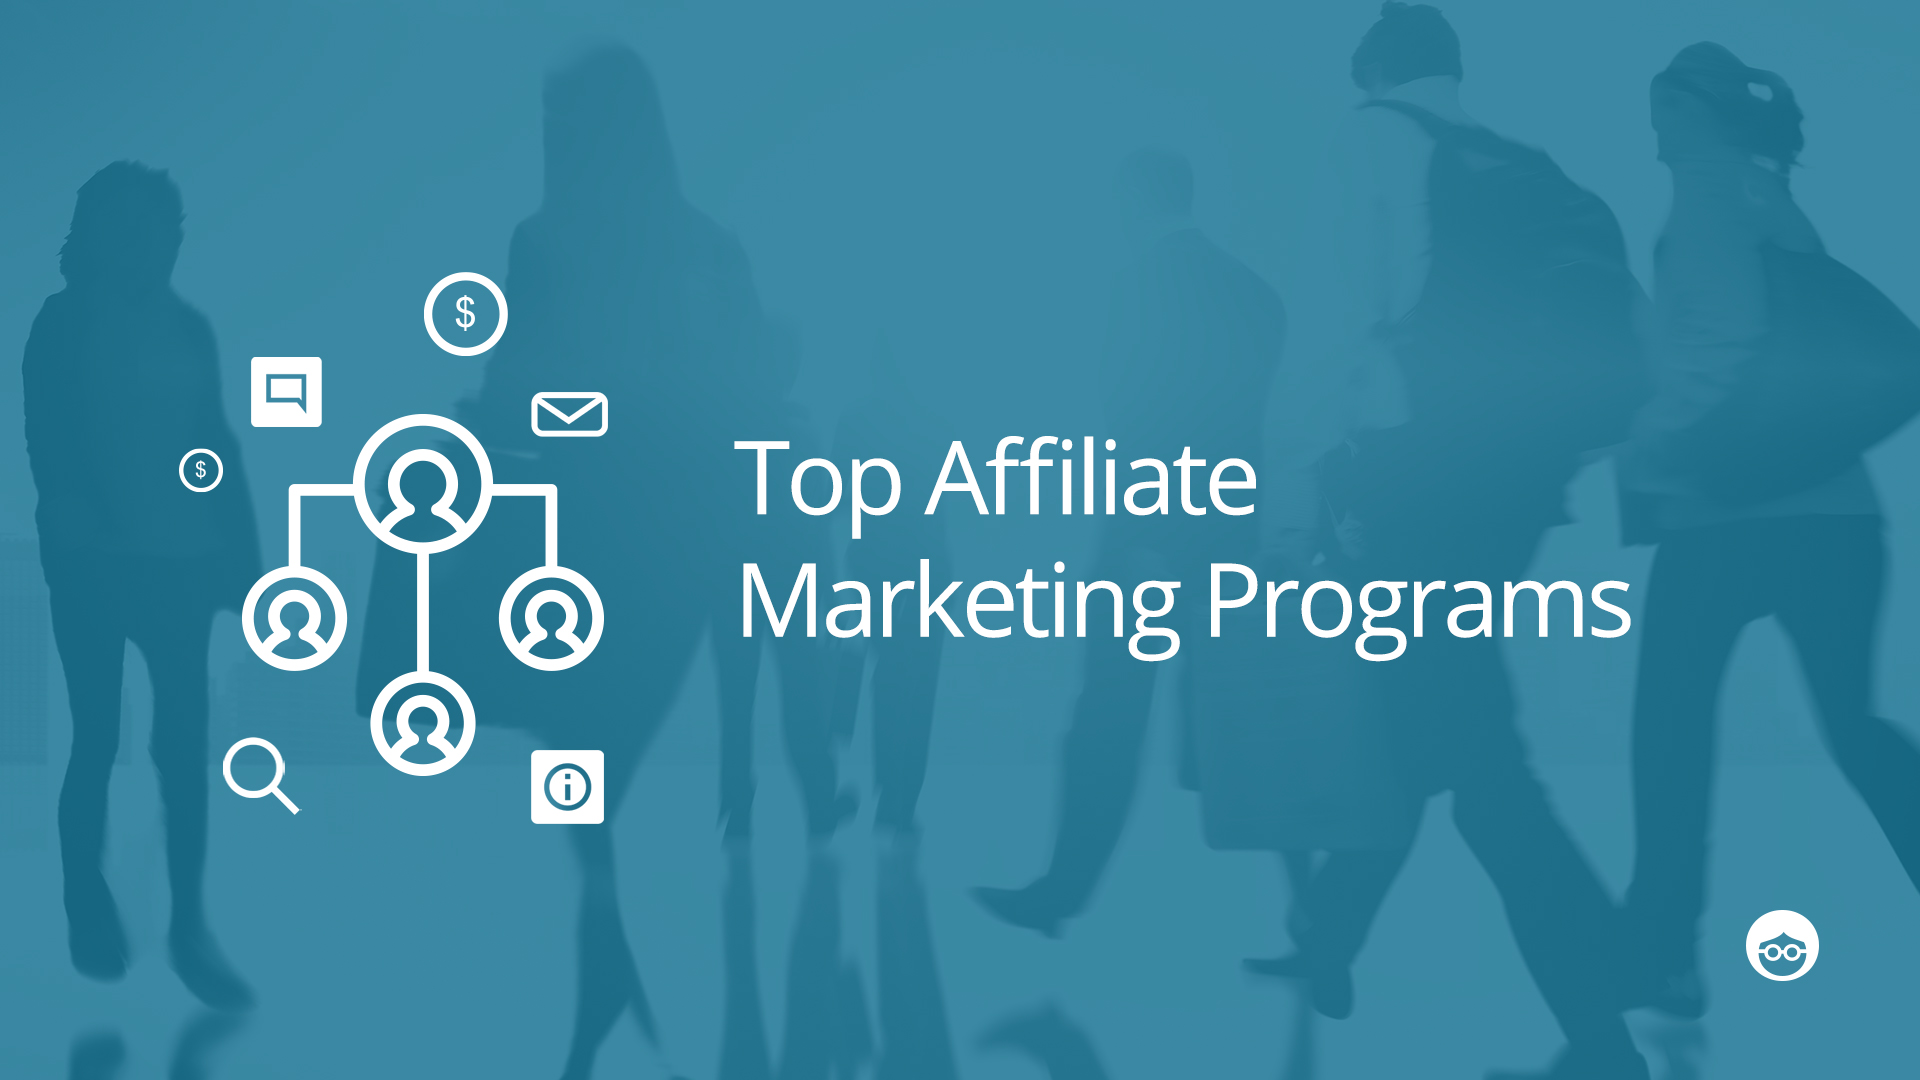 What are the types of affiliate marketing programs?